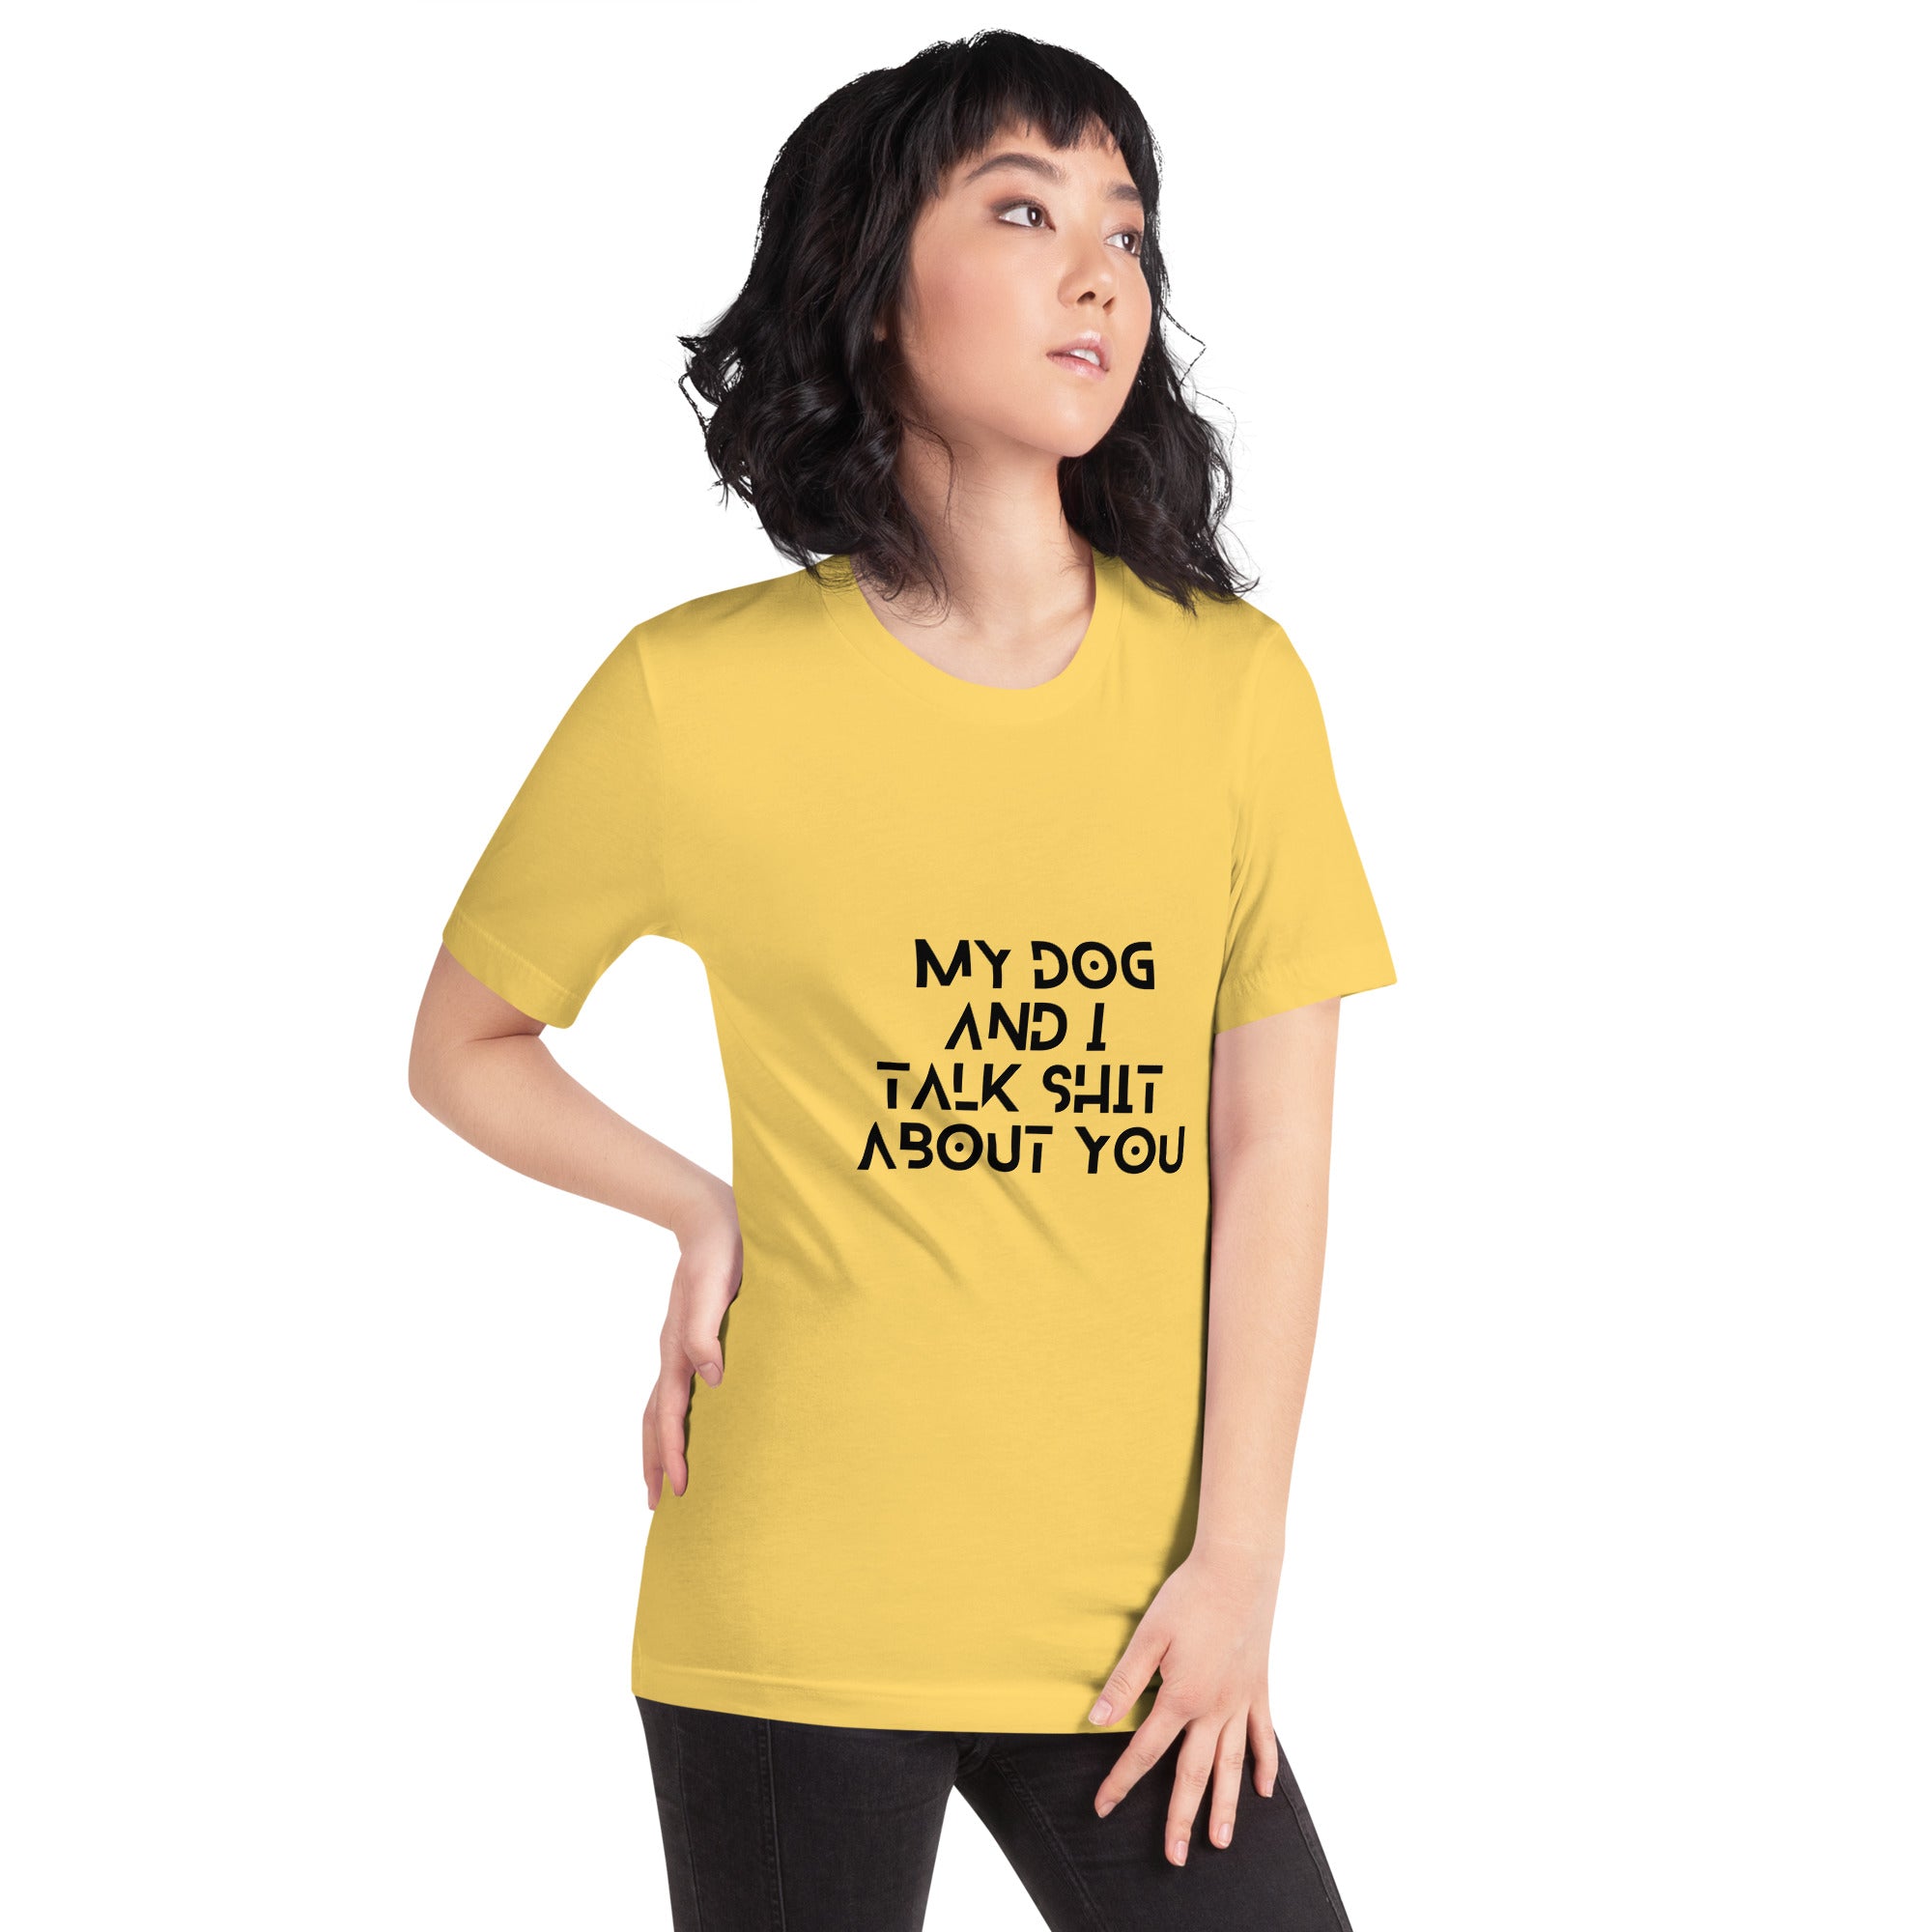 My Dog And I Talk Shit About You Women's T-Shirt